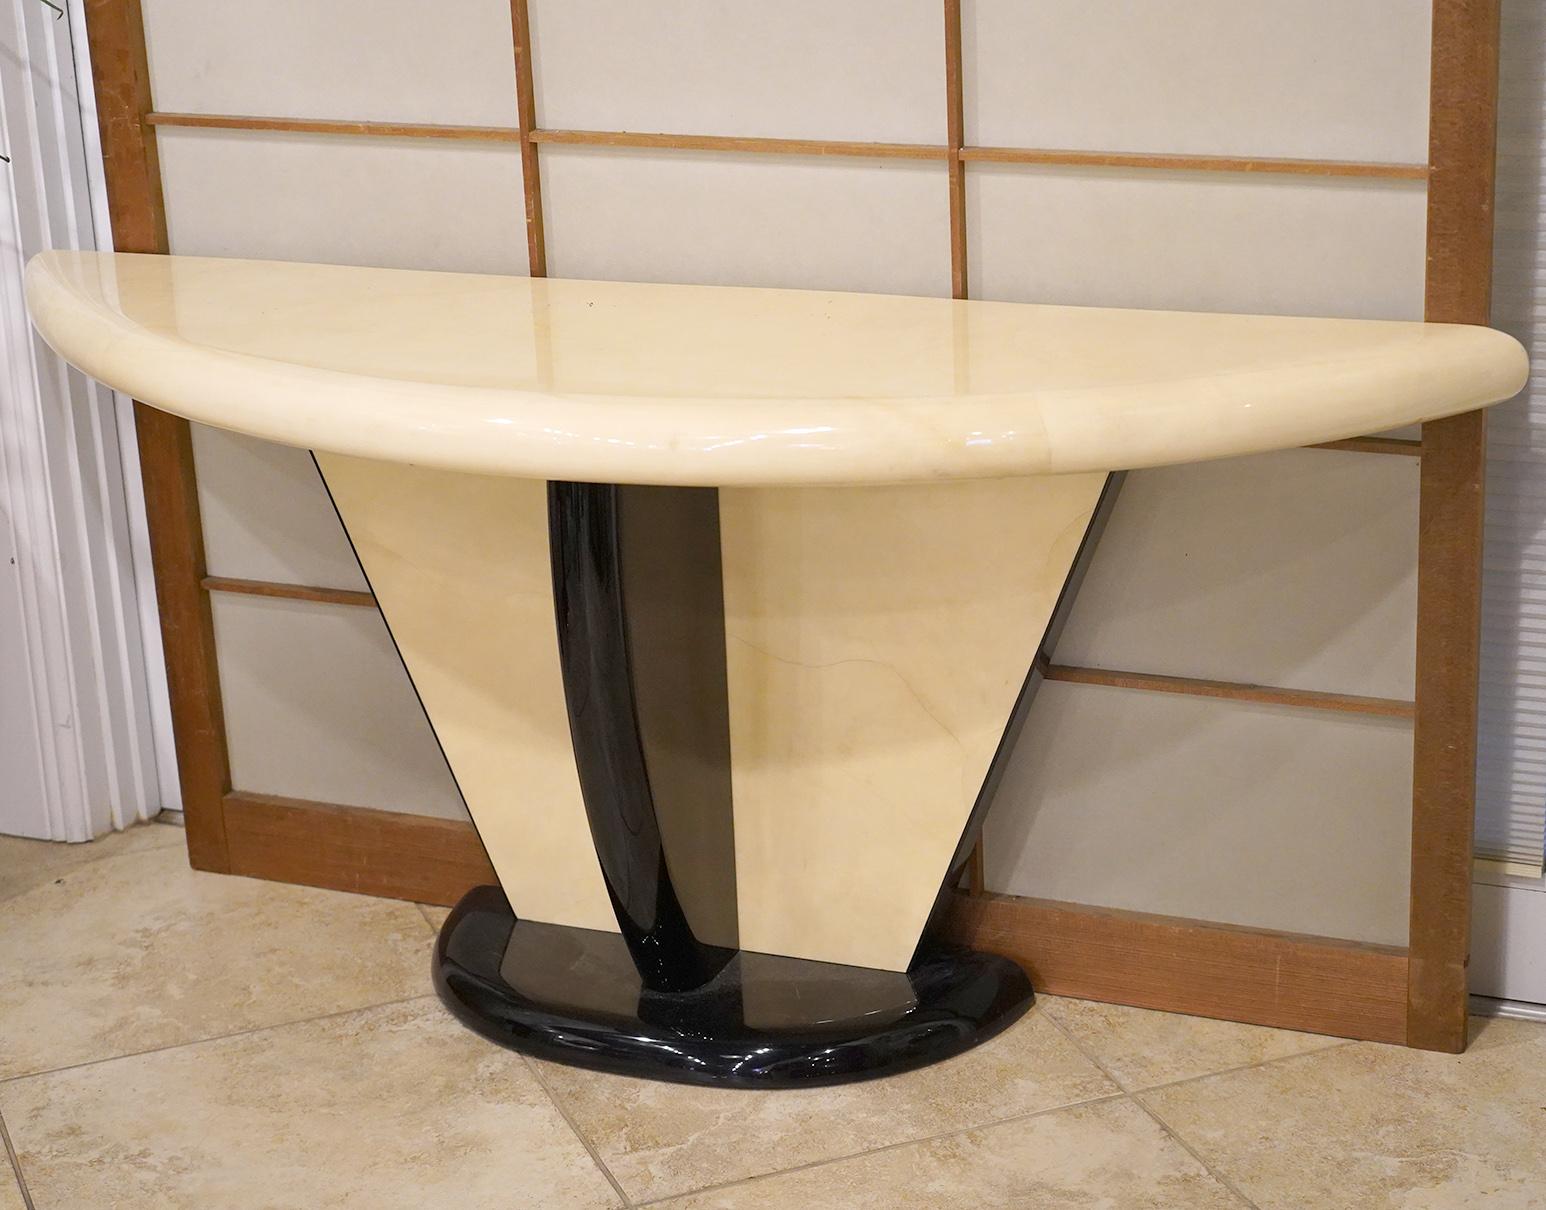 The striking design of this Art Deco inspired Karl Springer style demilune console table combines the warm and nuanced surfaces of lacquered goatskin parchment with high gloss ebonized structural elements. Perfect craftsmanship adds to the